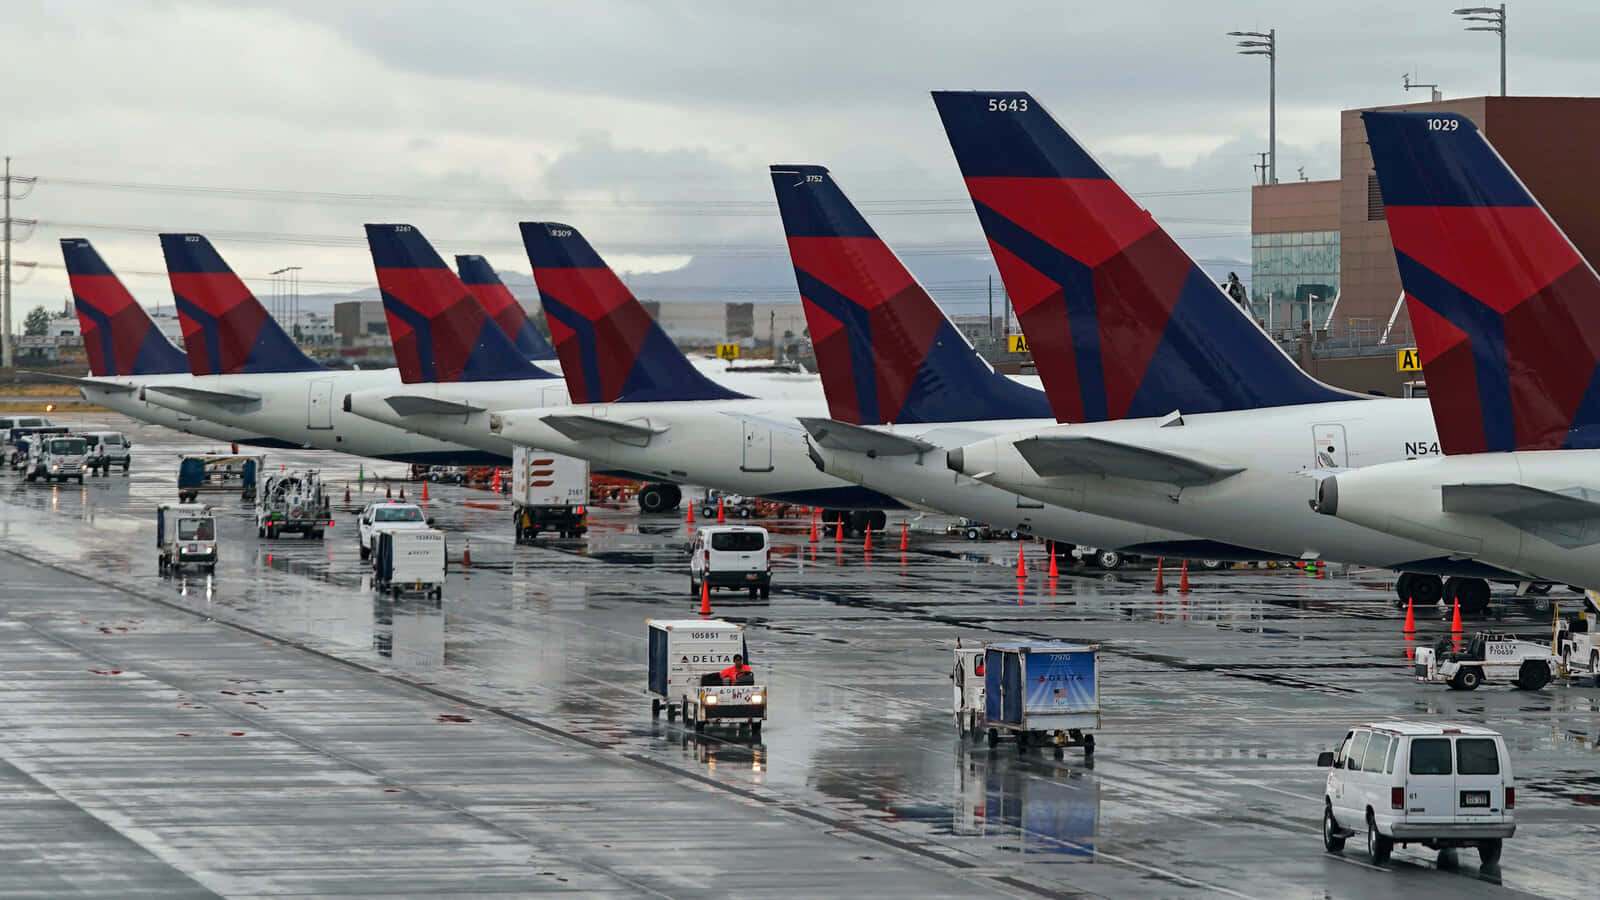 Delta Airline Tails Row Wet Tarmac Wallpaper